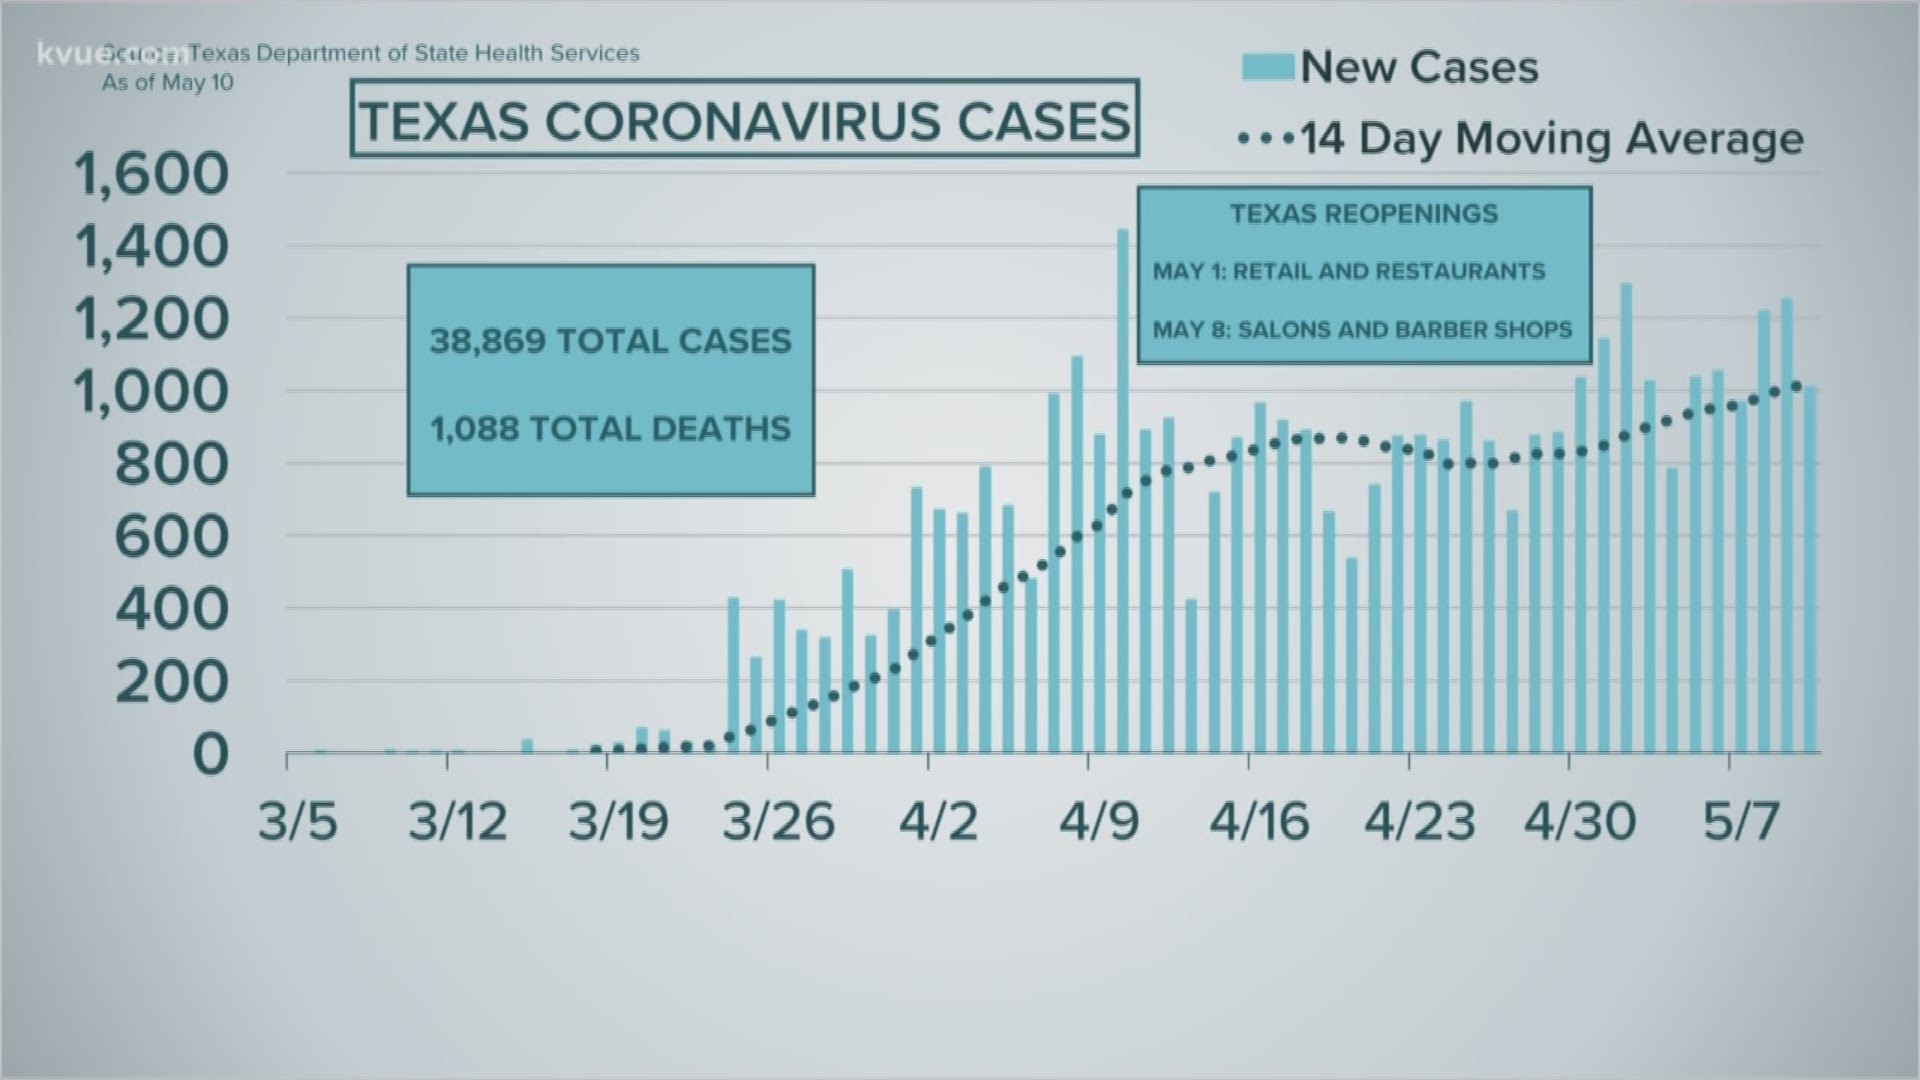 Here are the latest Texas coronavirus data from the Department of State Health Services.